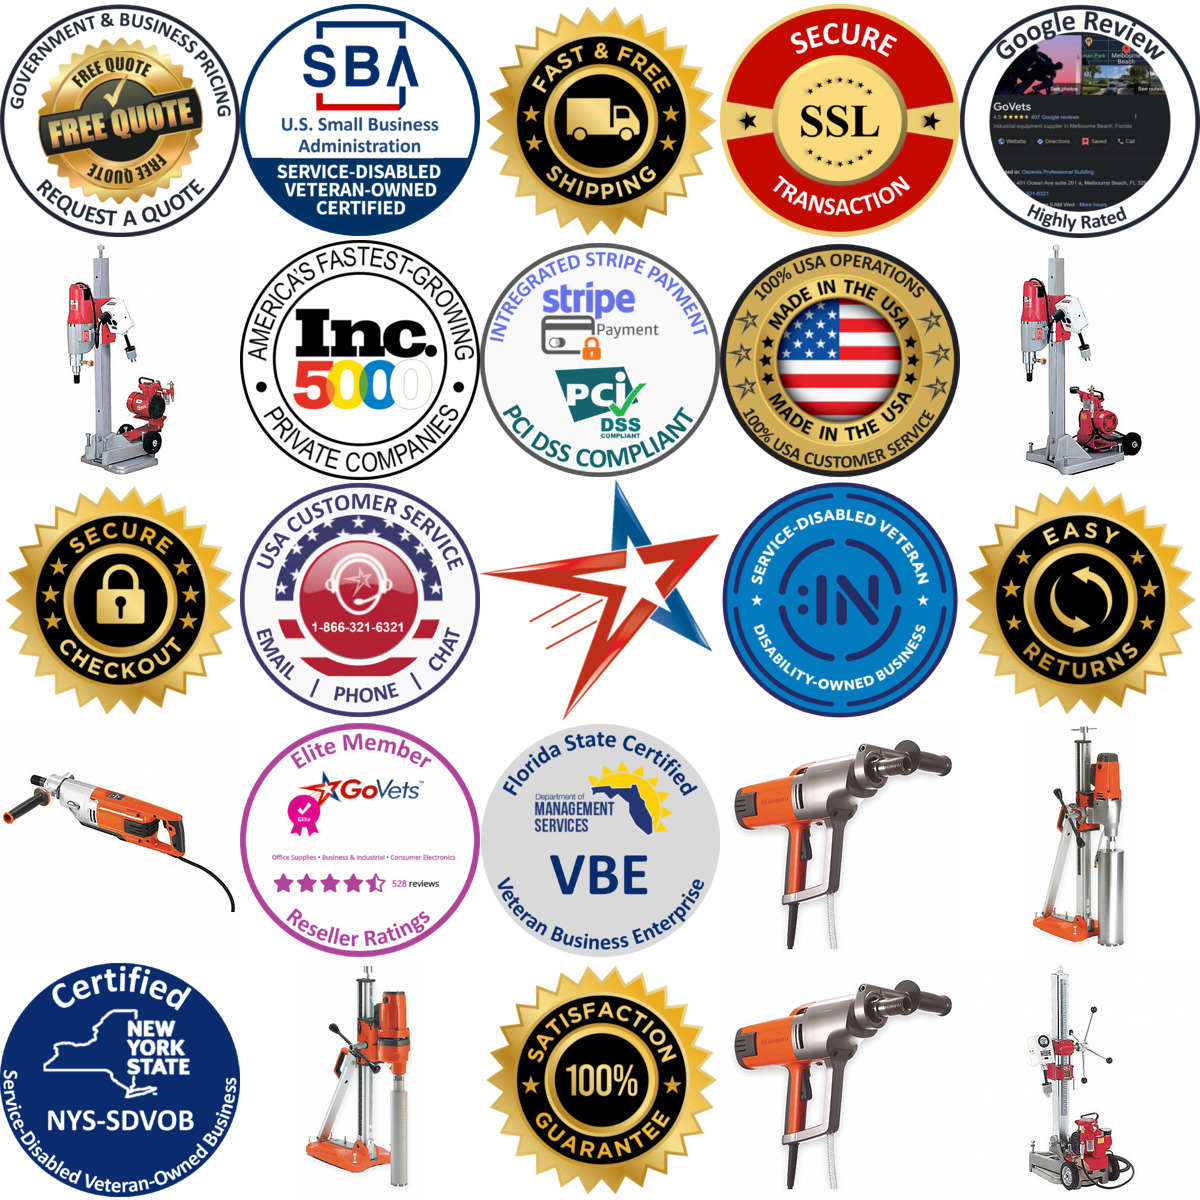 A selection of Coring Rig products on GoVets